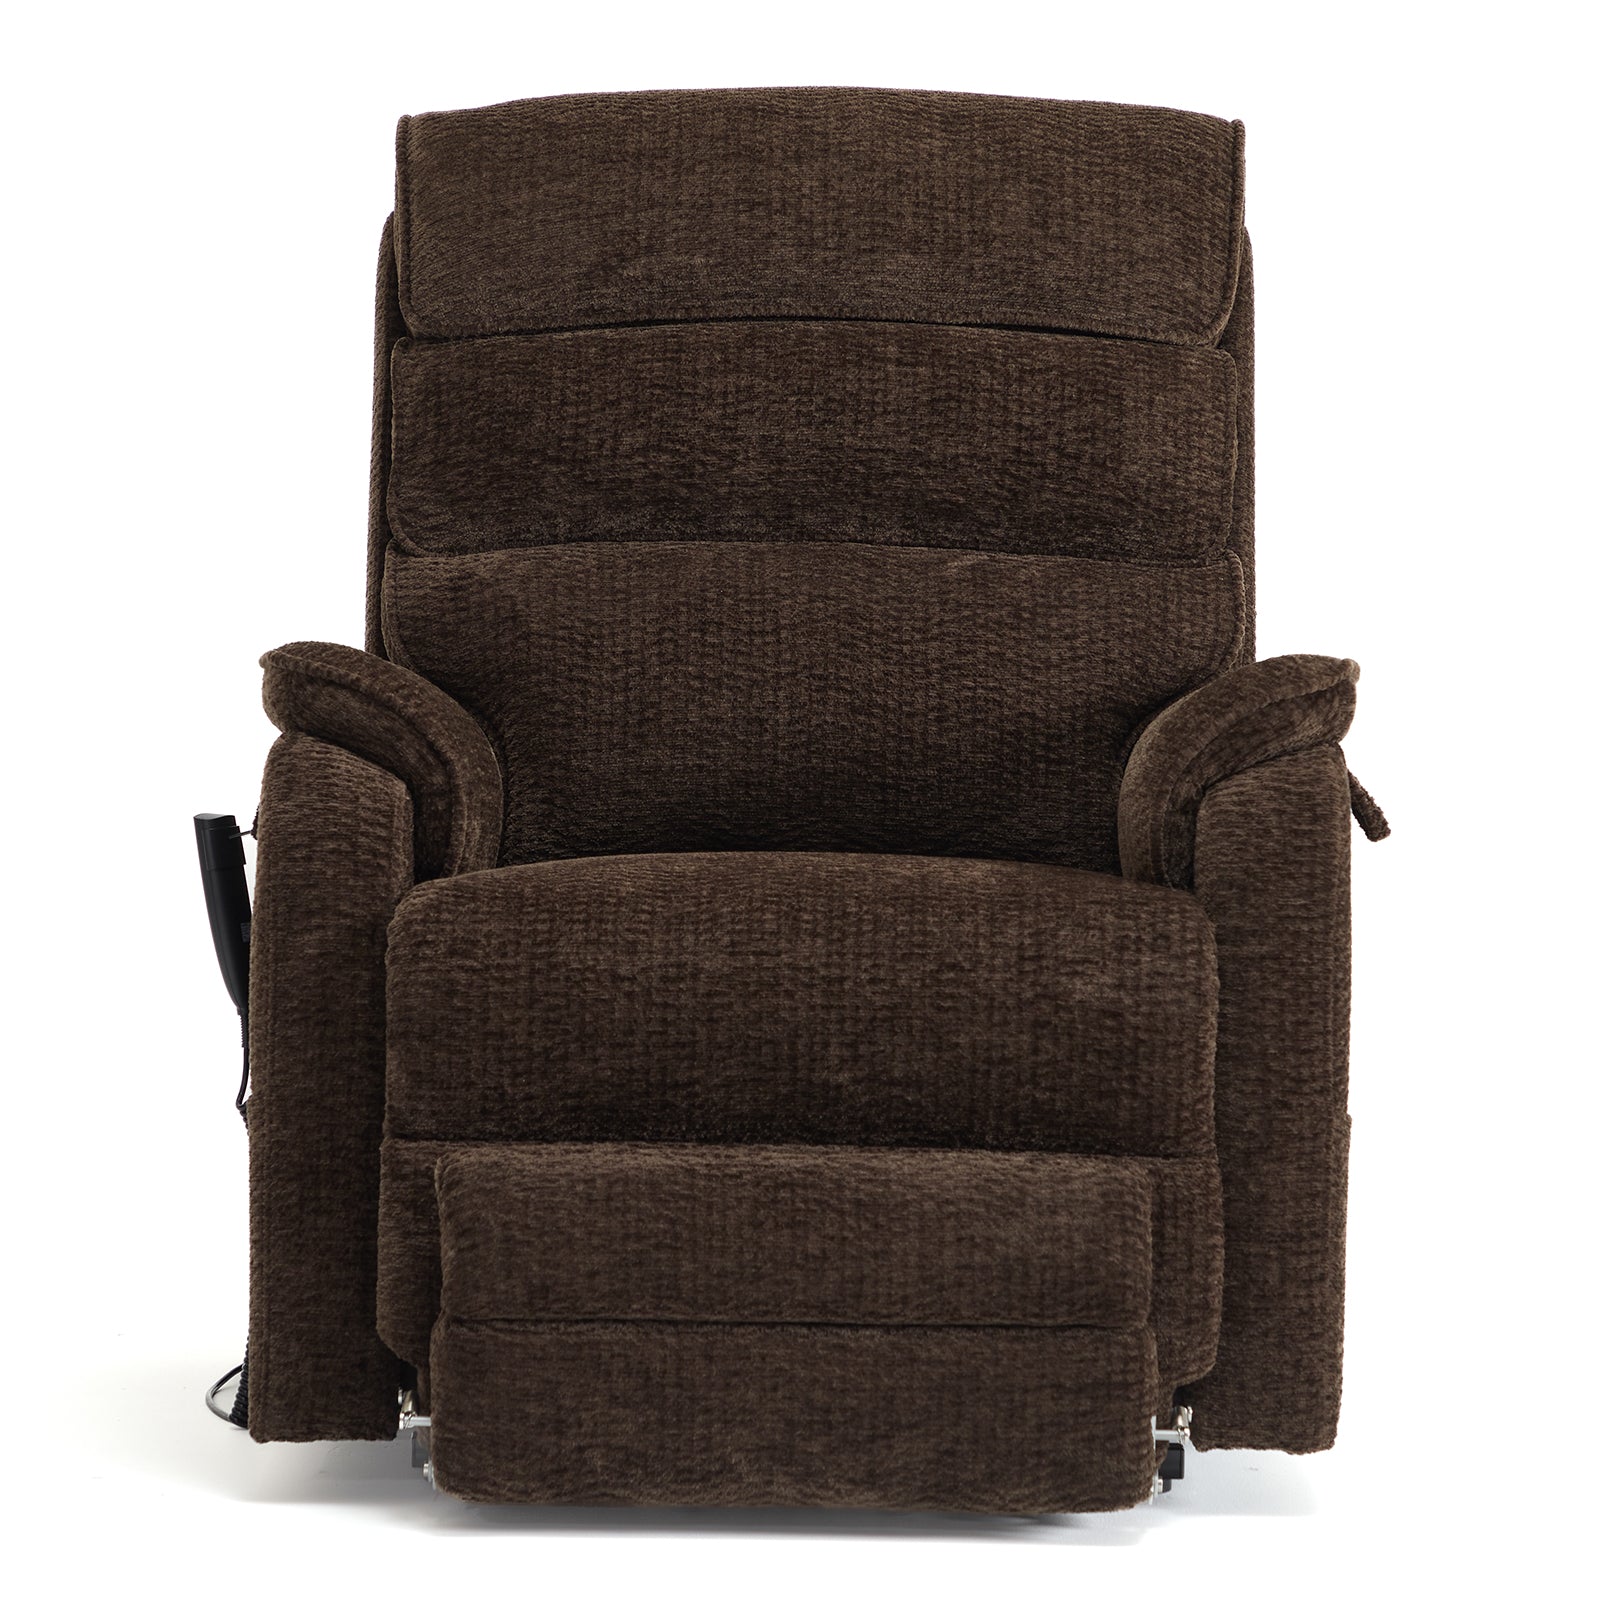 Best Recliner For Tall Man With Heat And Massage(Lay Flat)